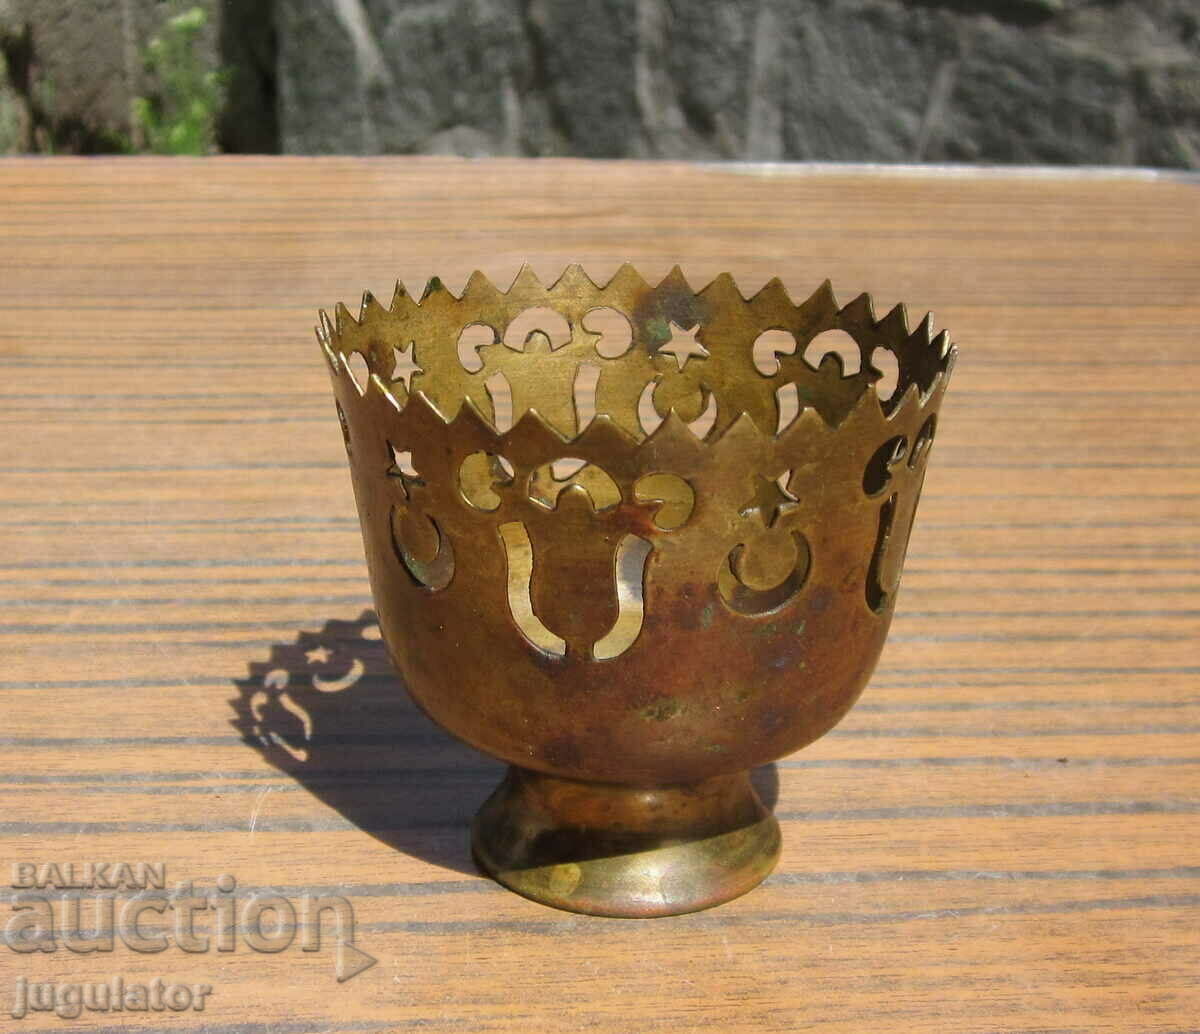 Turkish Ottoman Empire antique bronze cup with ornaments